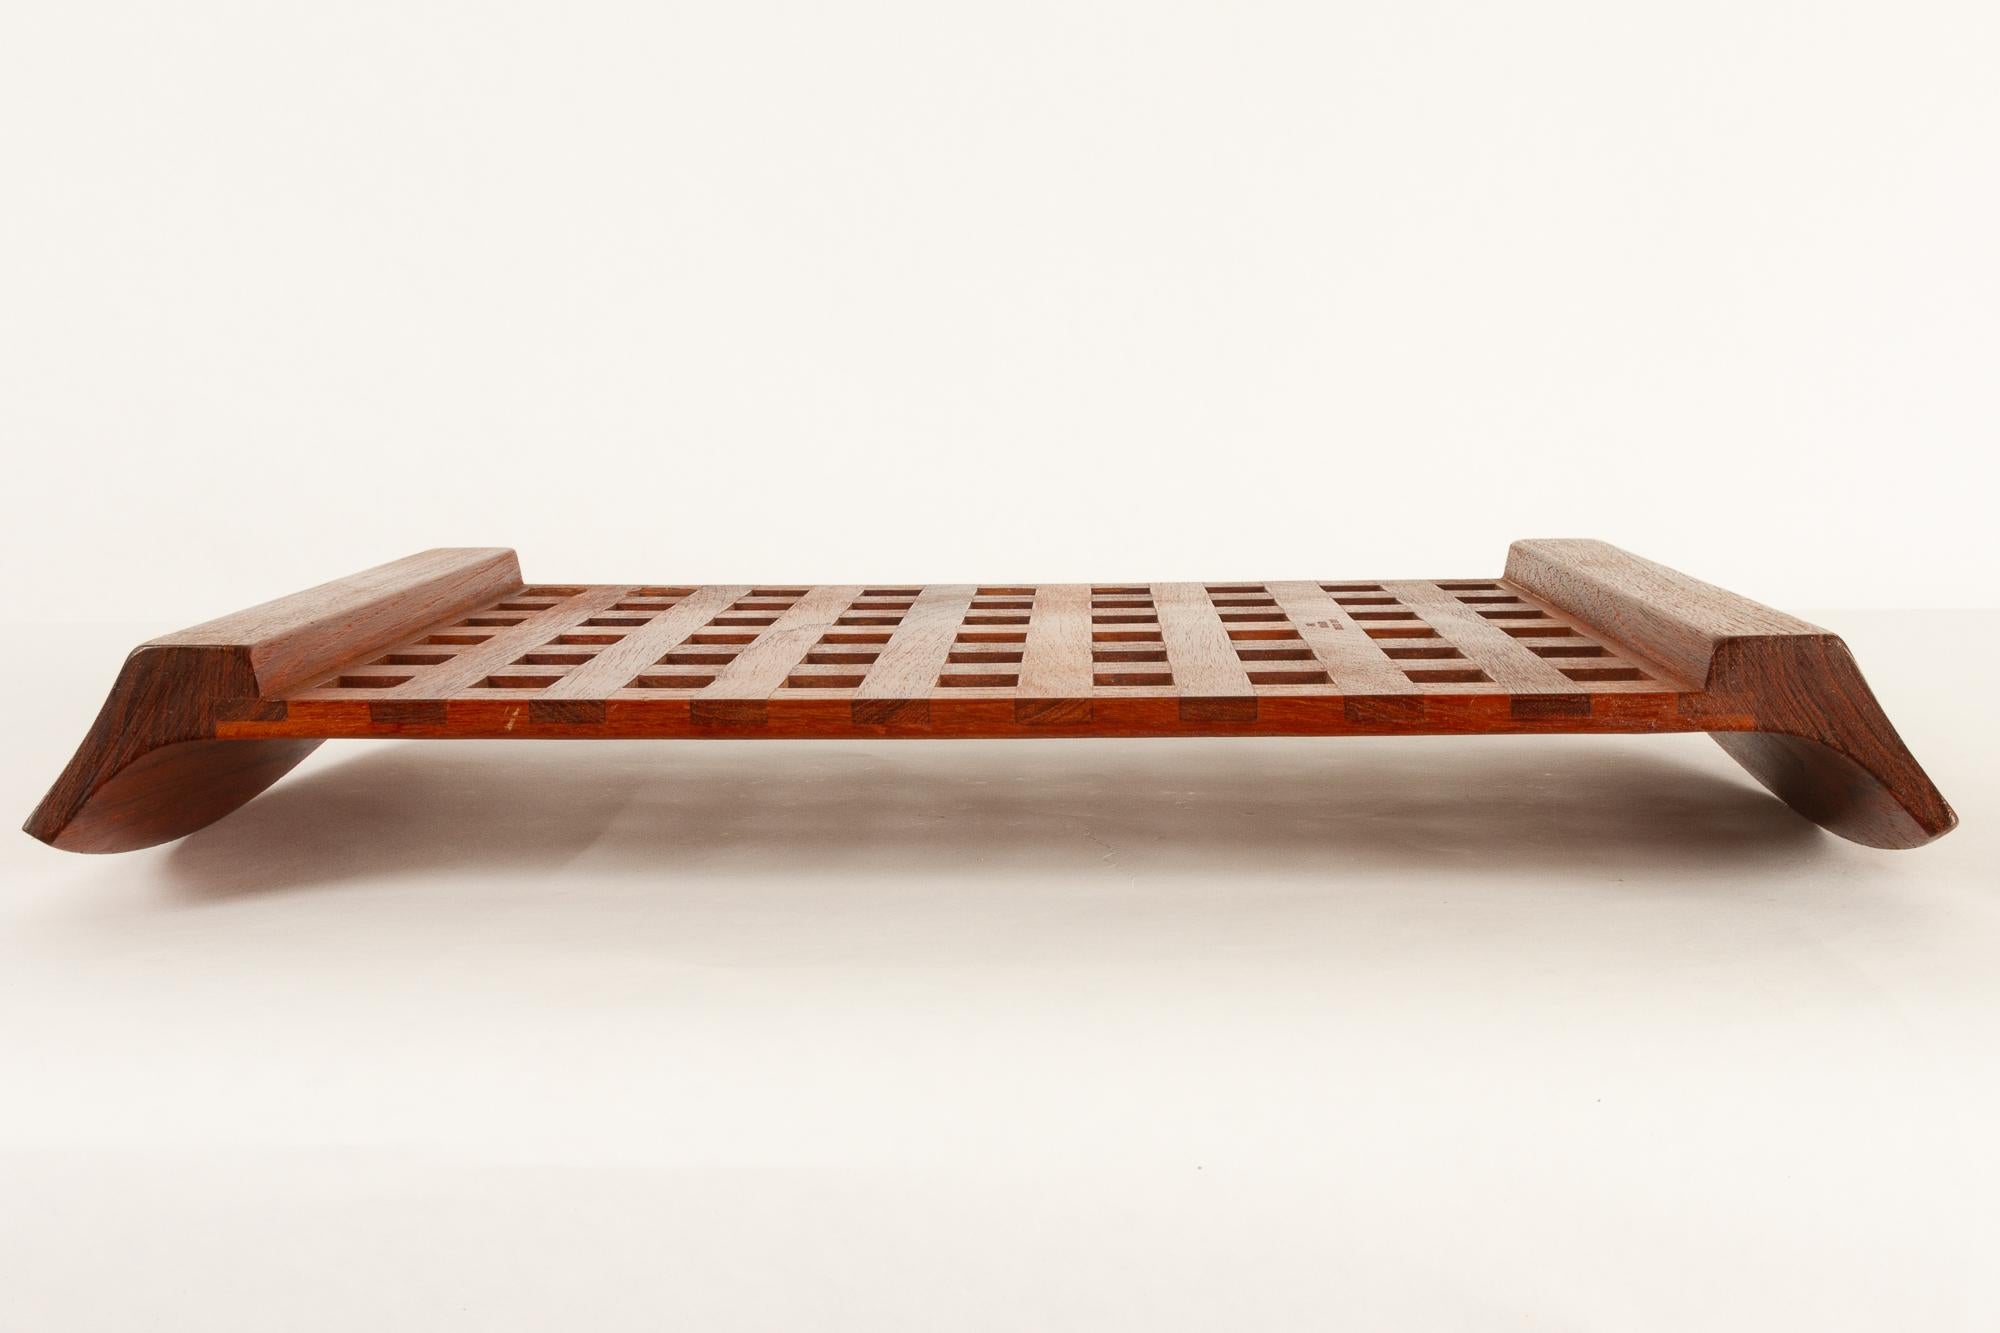 Vintage Danish Teak Tray with Glass Bowls by Jens Harald Quistgaard, 1960s For Sale 7